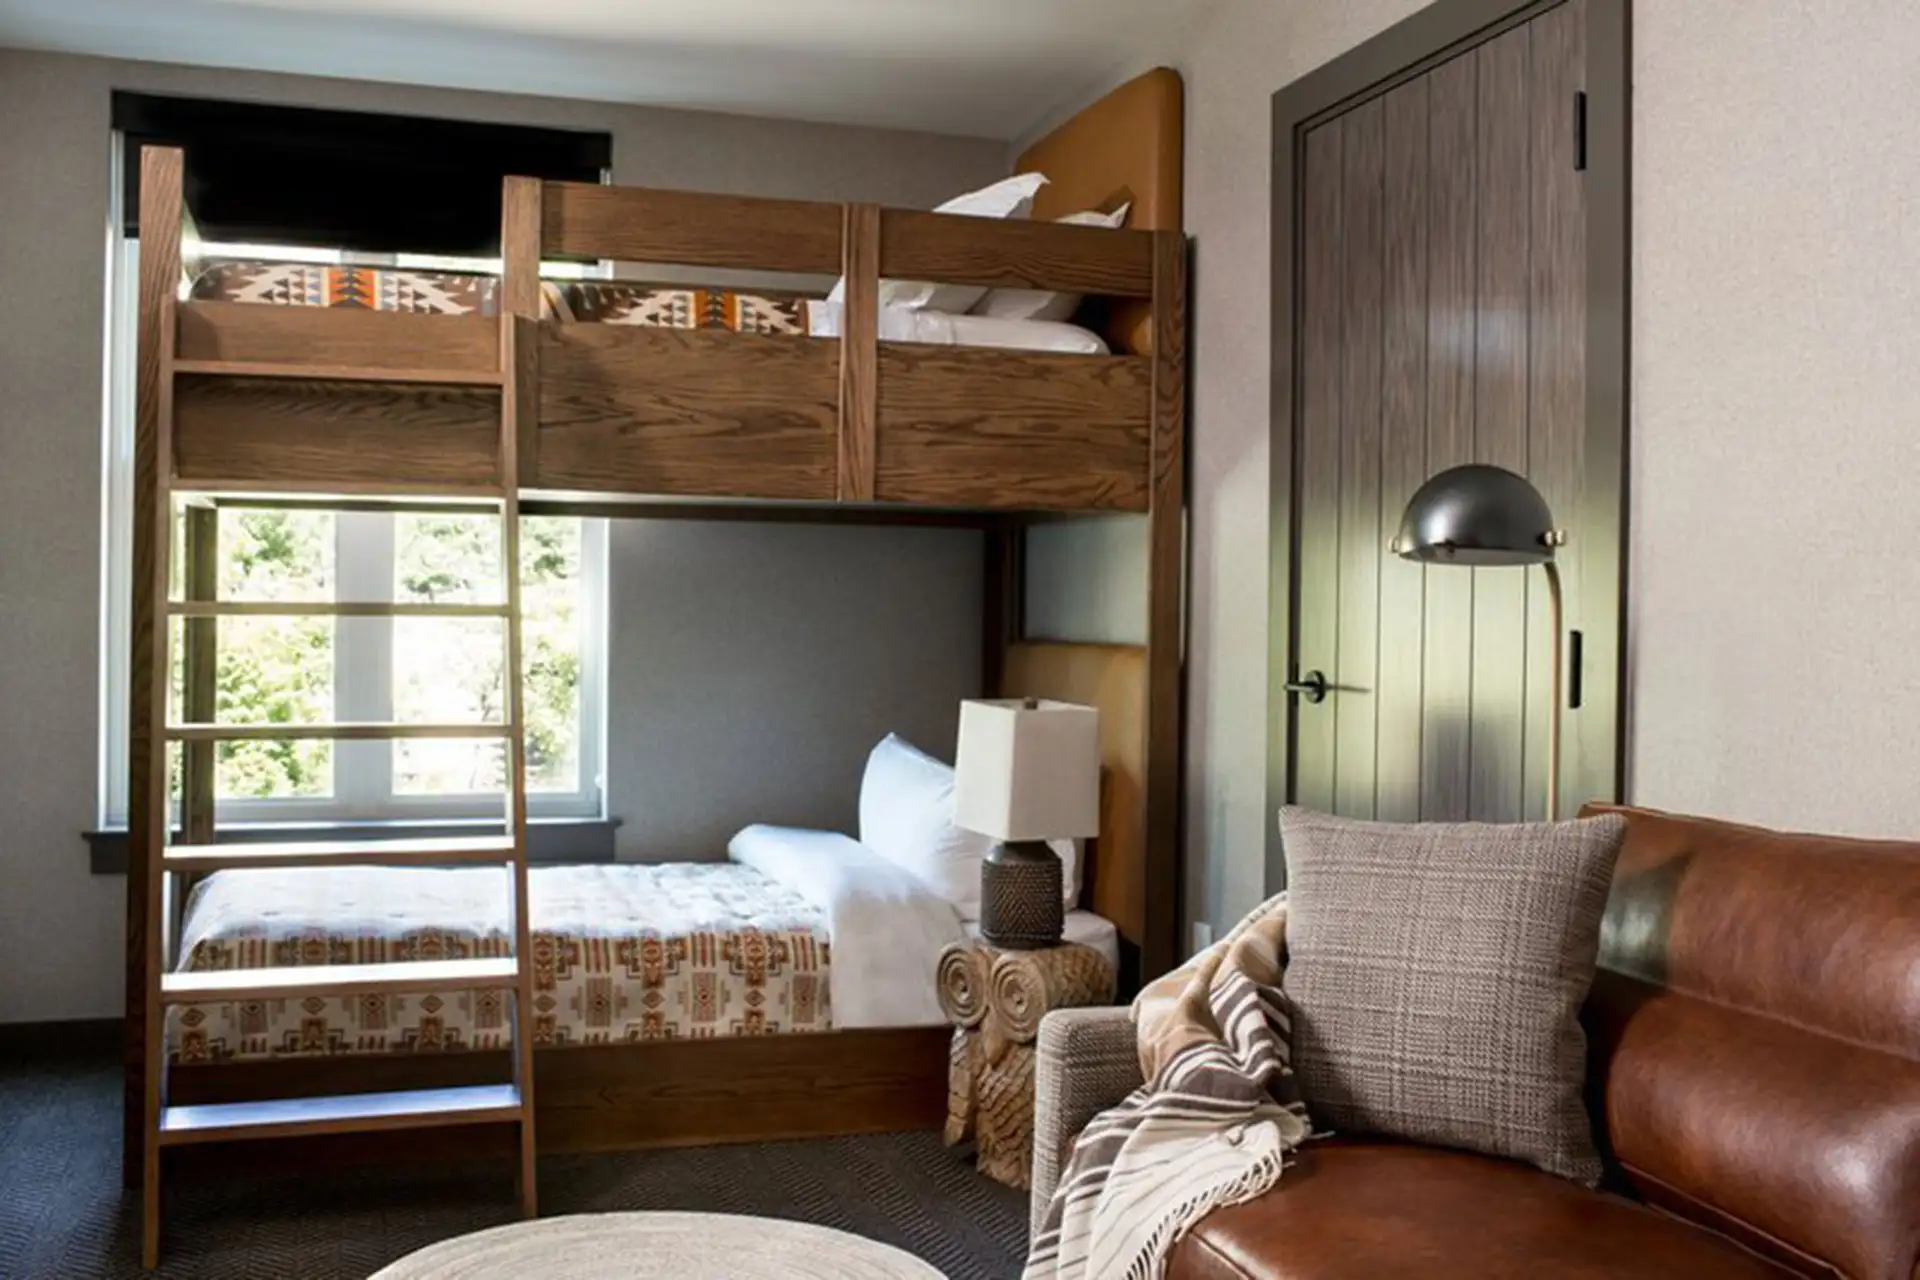 Bunk Bed Room at the Kimpton RiverPlace Hotel; Courtesy of Kimpton RiverPlace Hotel